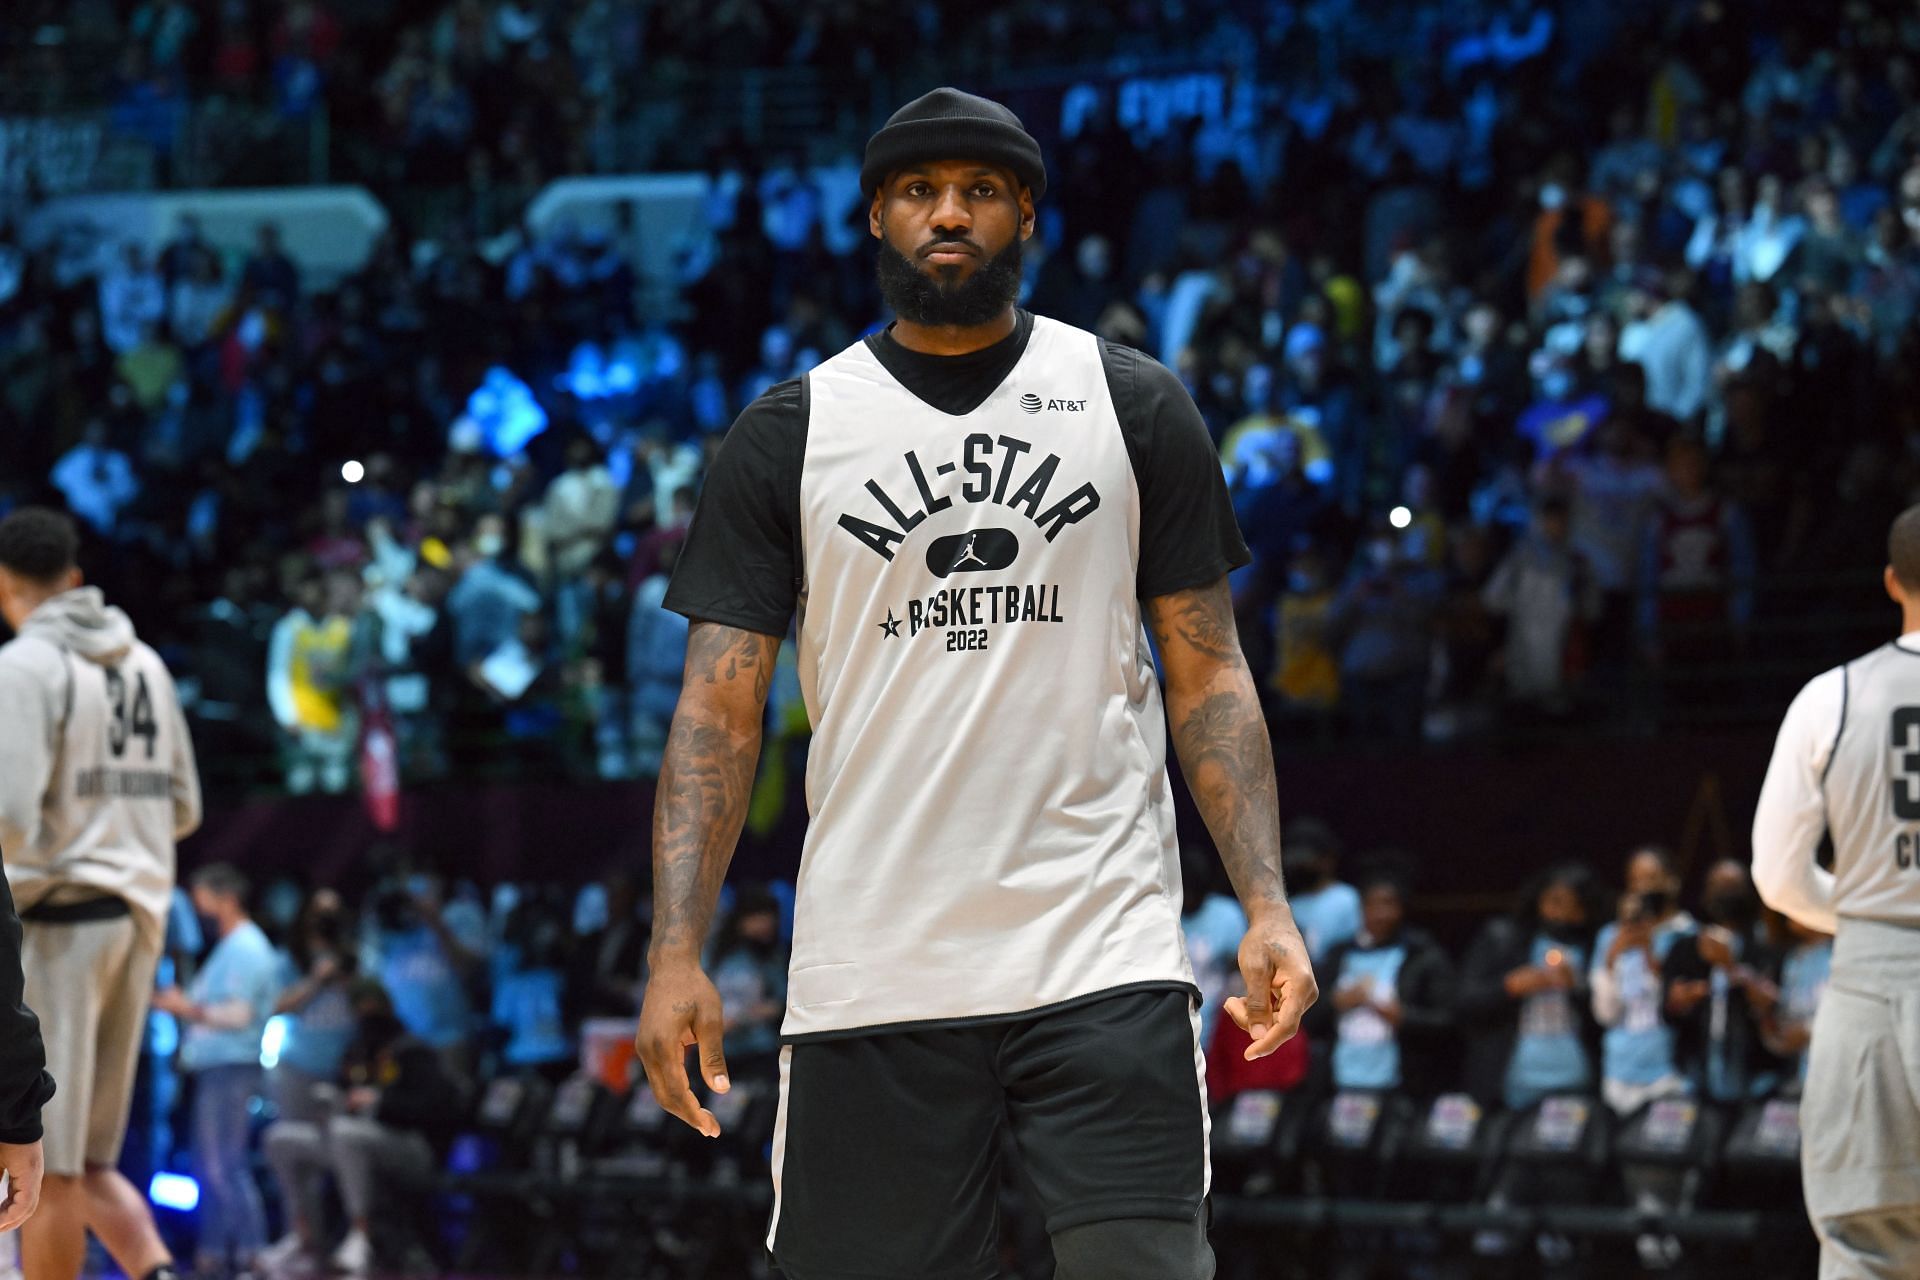 LeBron James at the 2022 NBA All-Star Practice